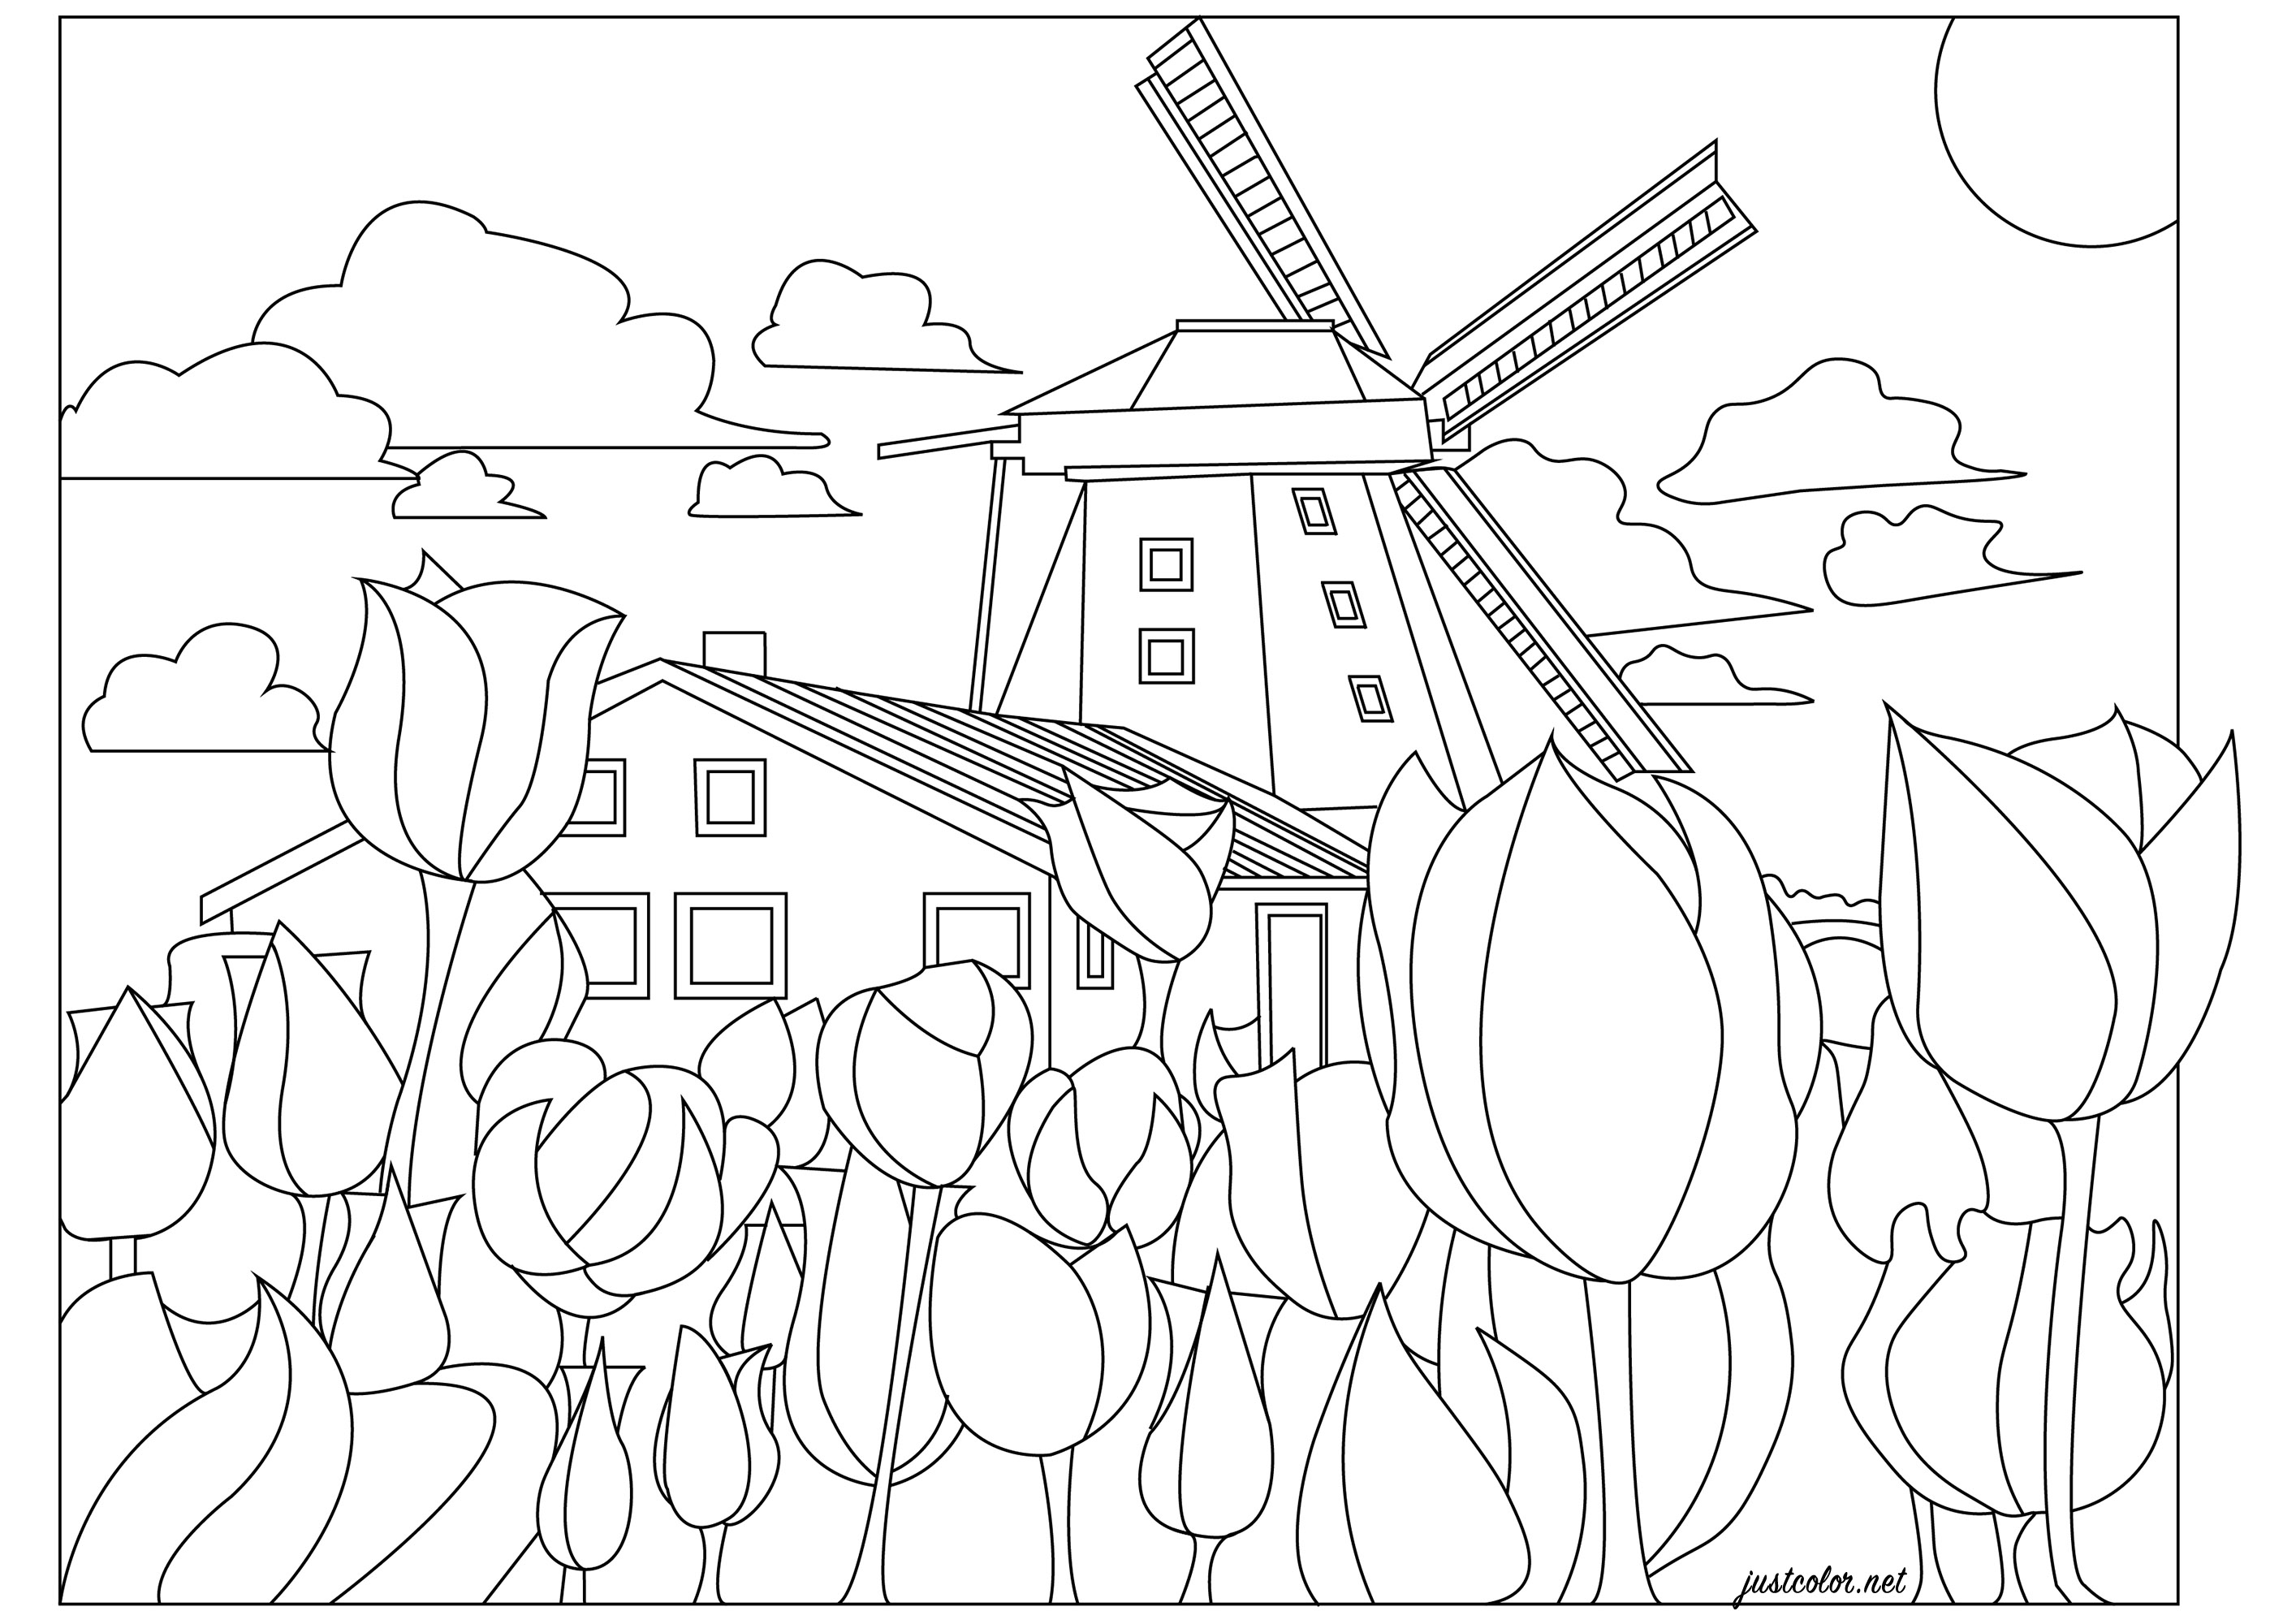 The Netherlands : windmills and tulips - Landscapes Adult Coloring Pages